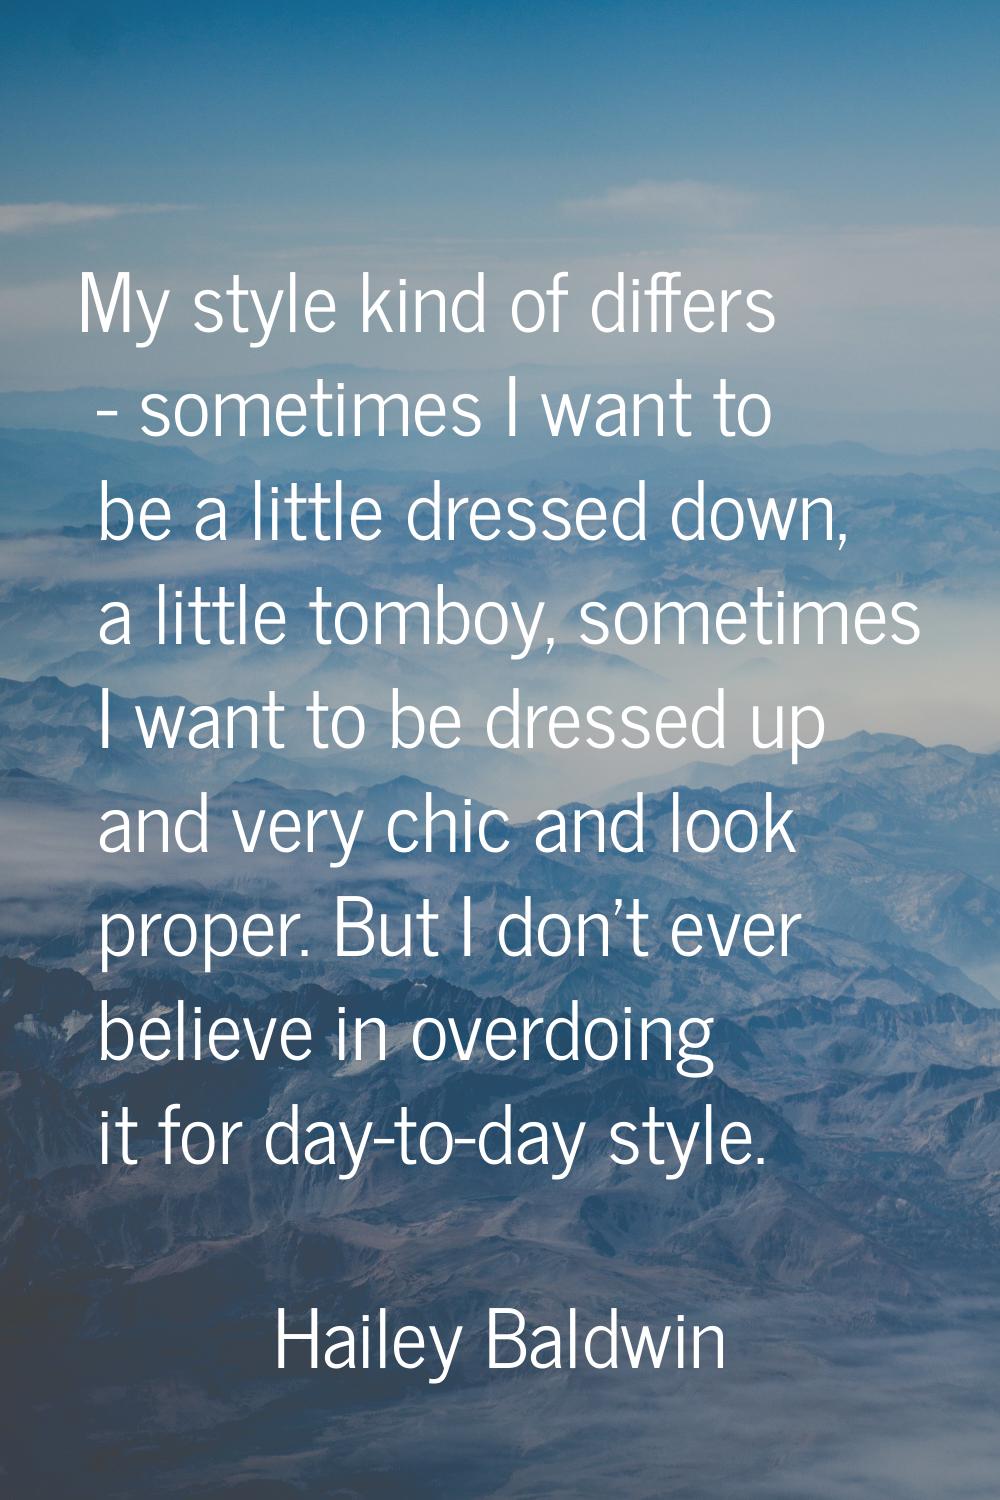 My style kind of differs - sometimes I want to be a little dressed down, a little tomboy, sometimes